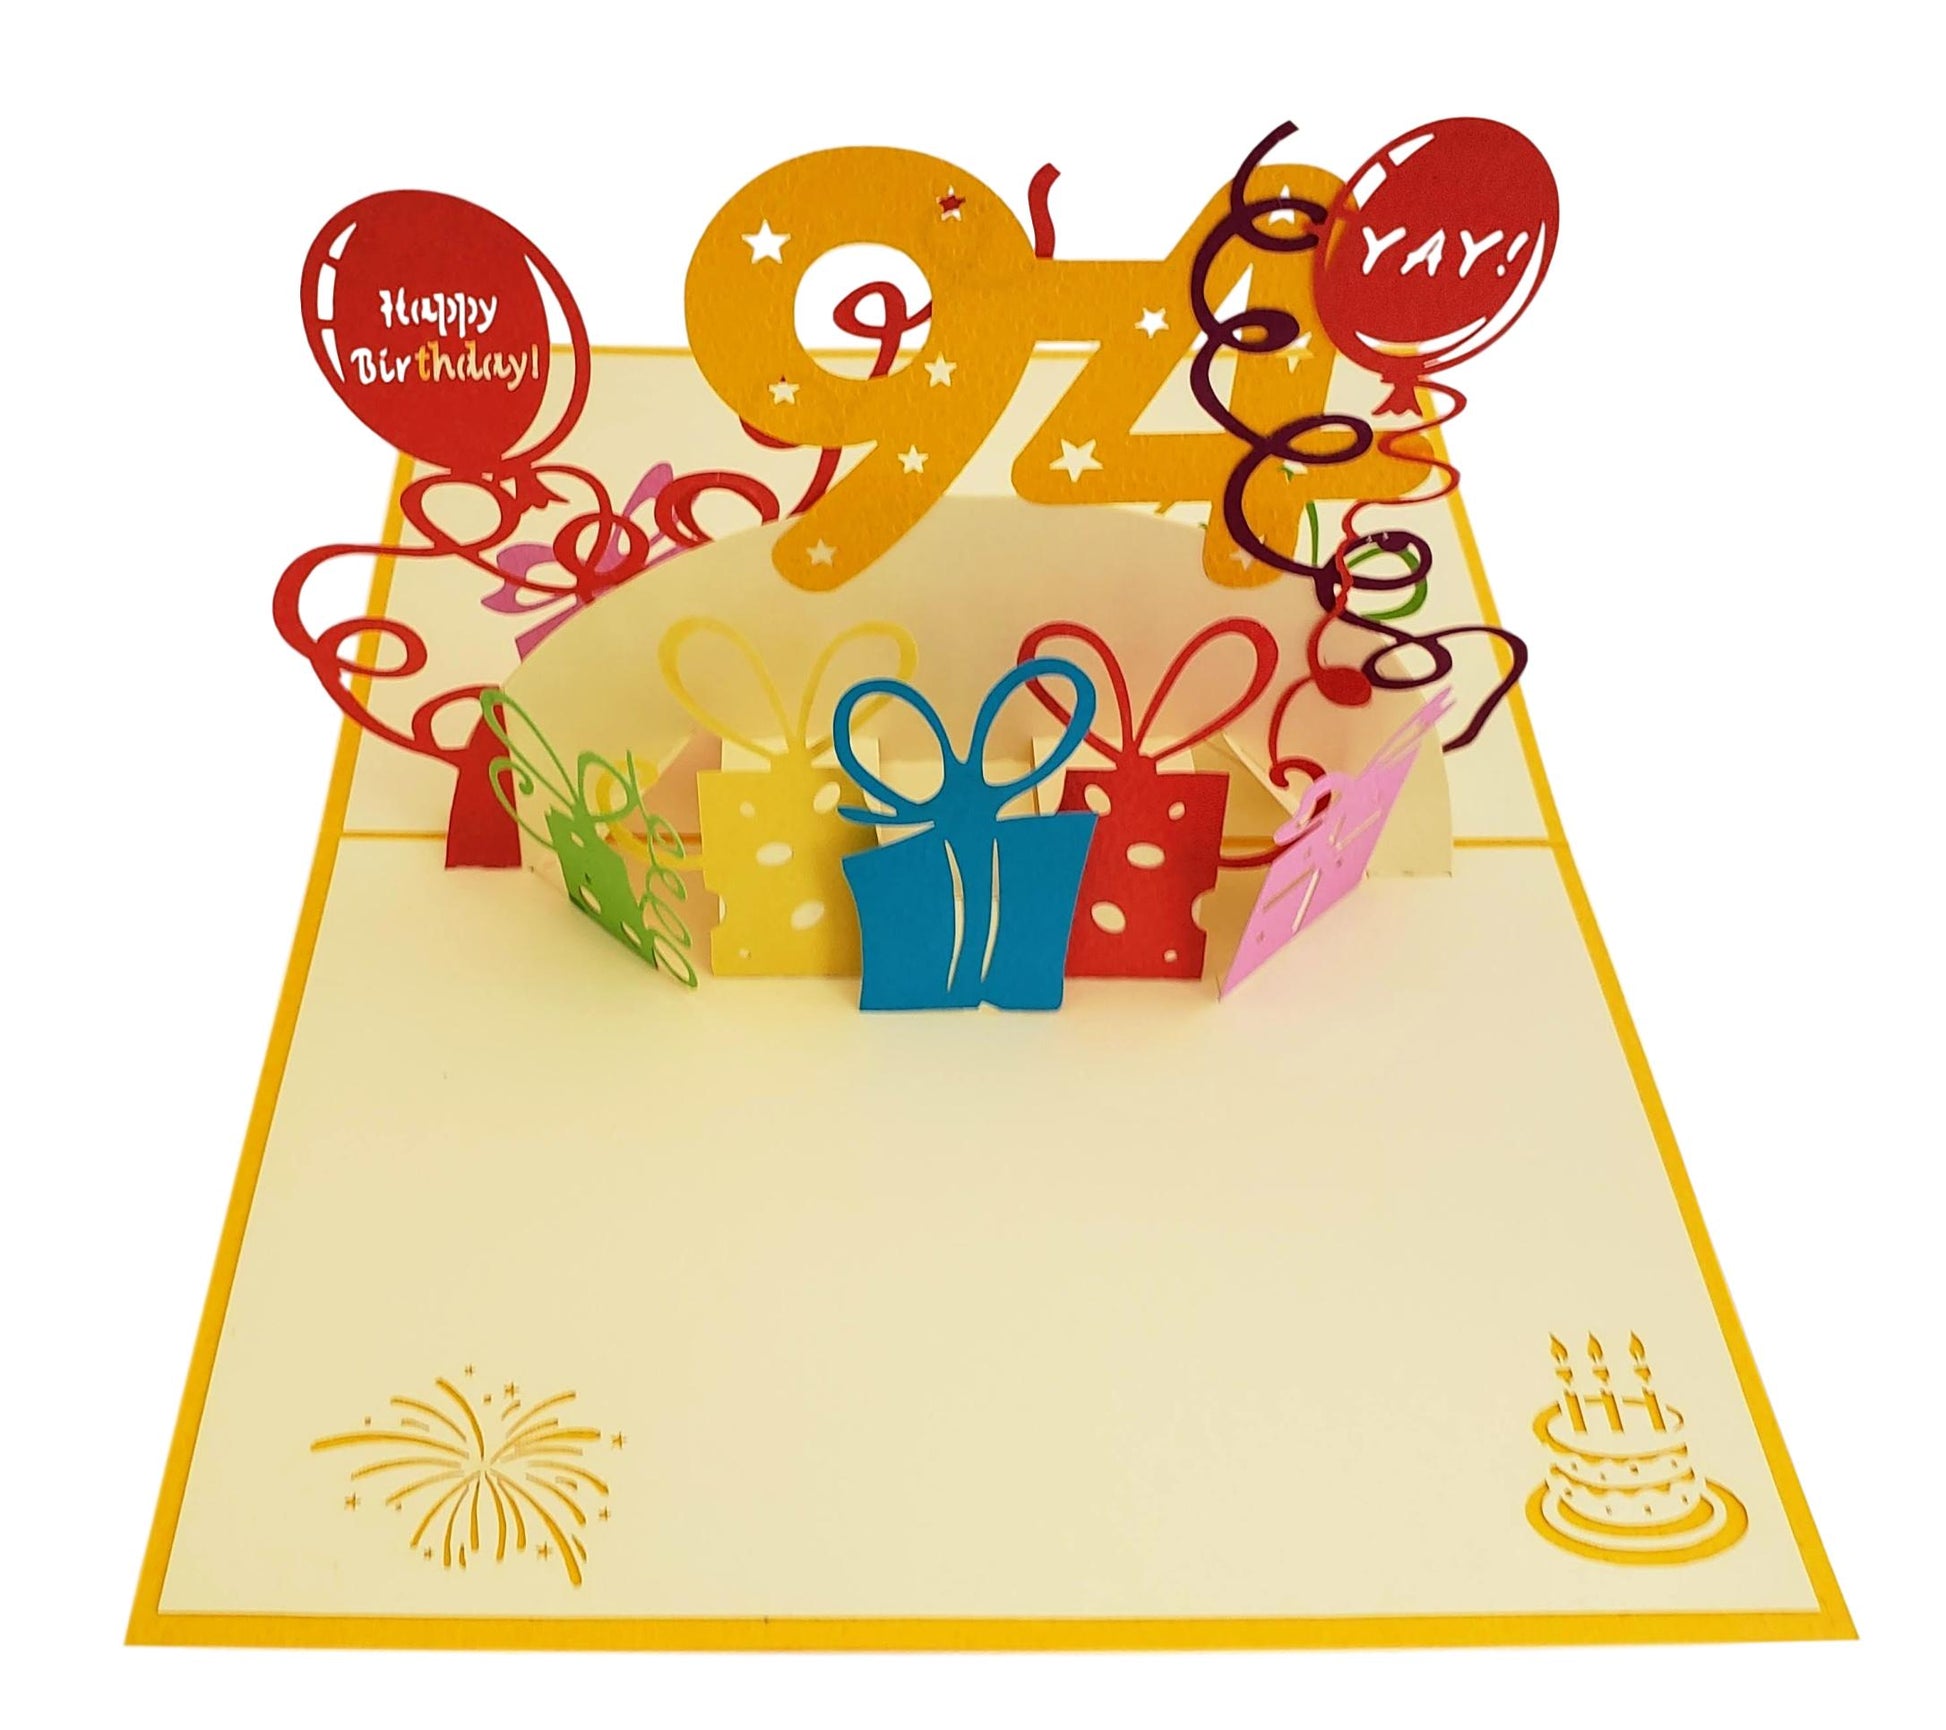 Happy 94th Birthday with Presents 3D Pop Up Greeting Card - Awesome - Birthday - Compleanos - Feliz - iGifts And Cards